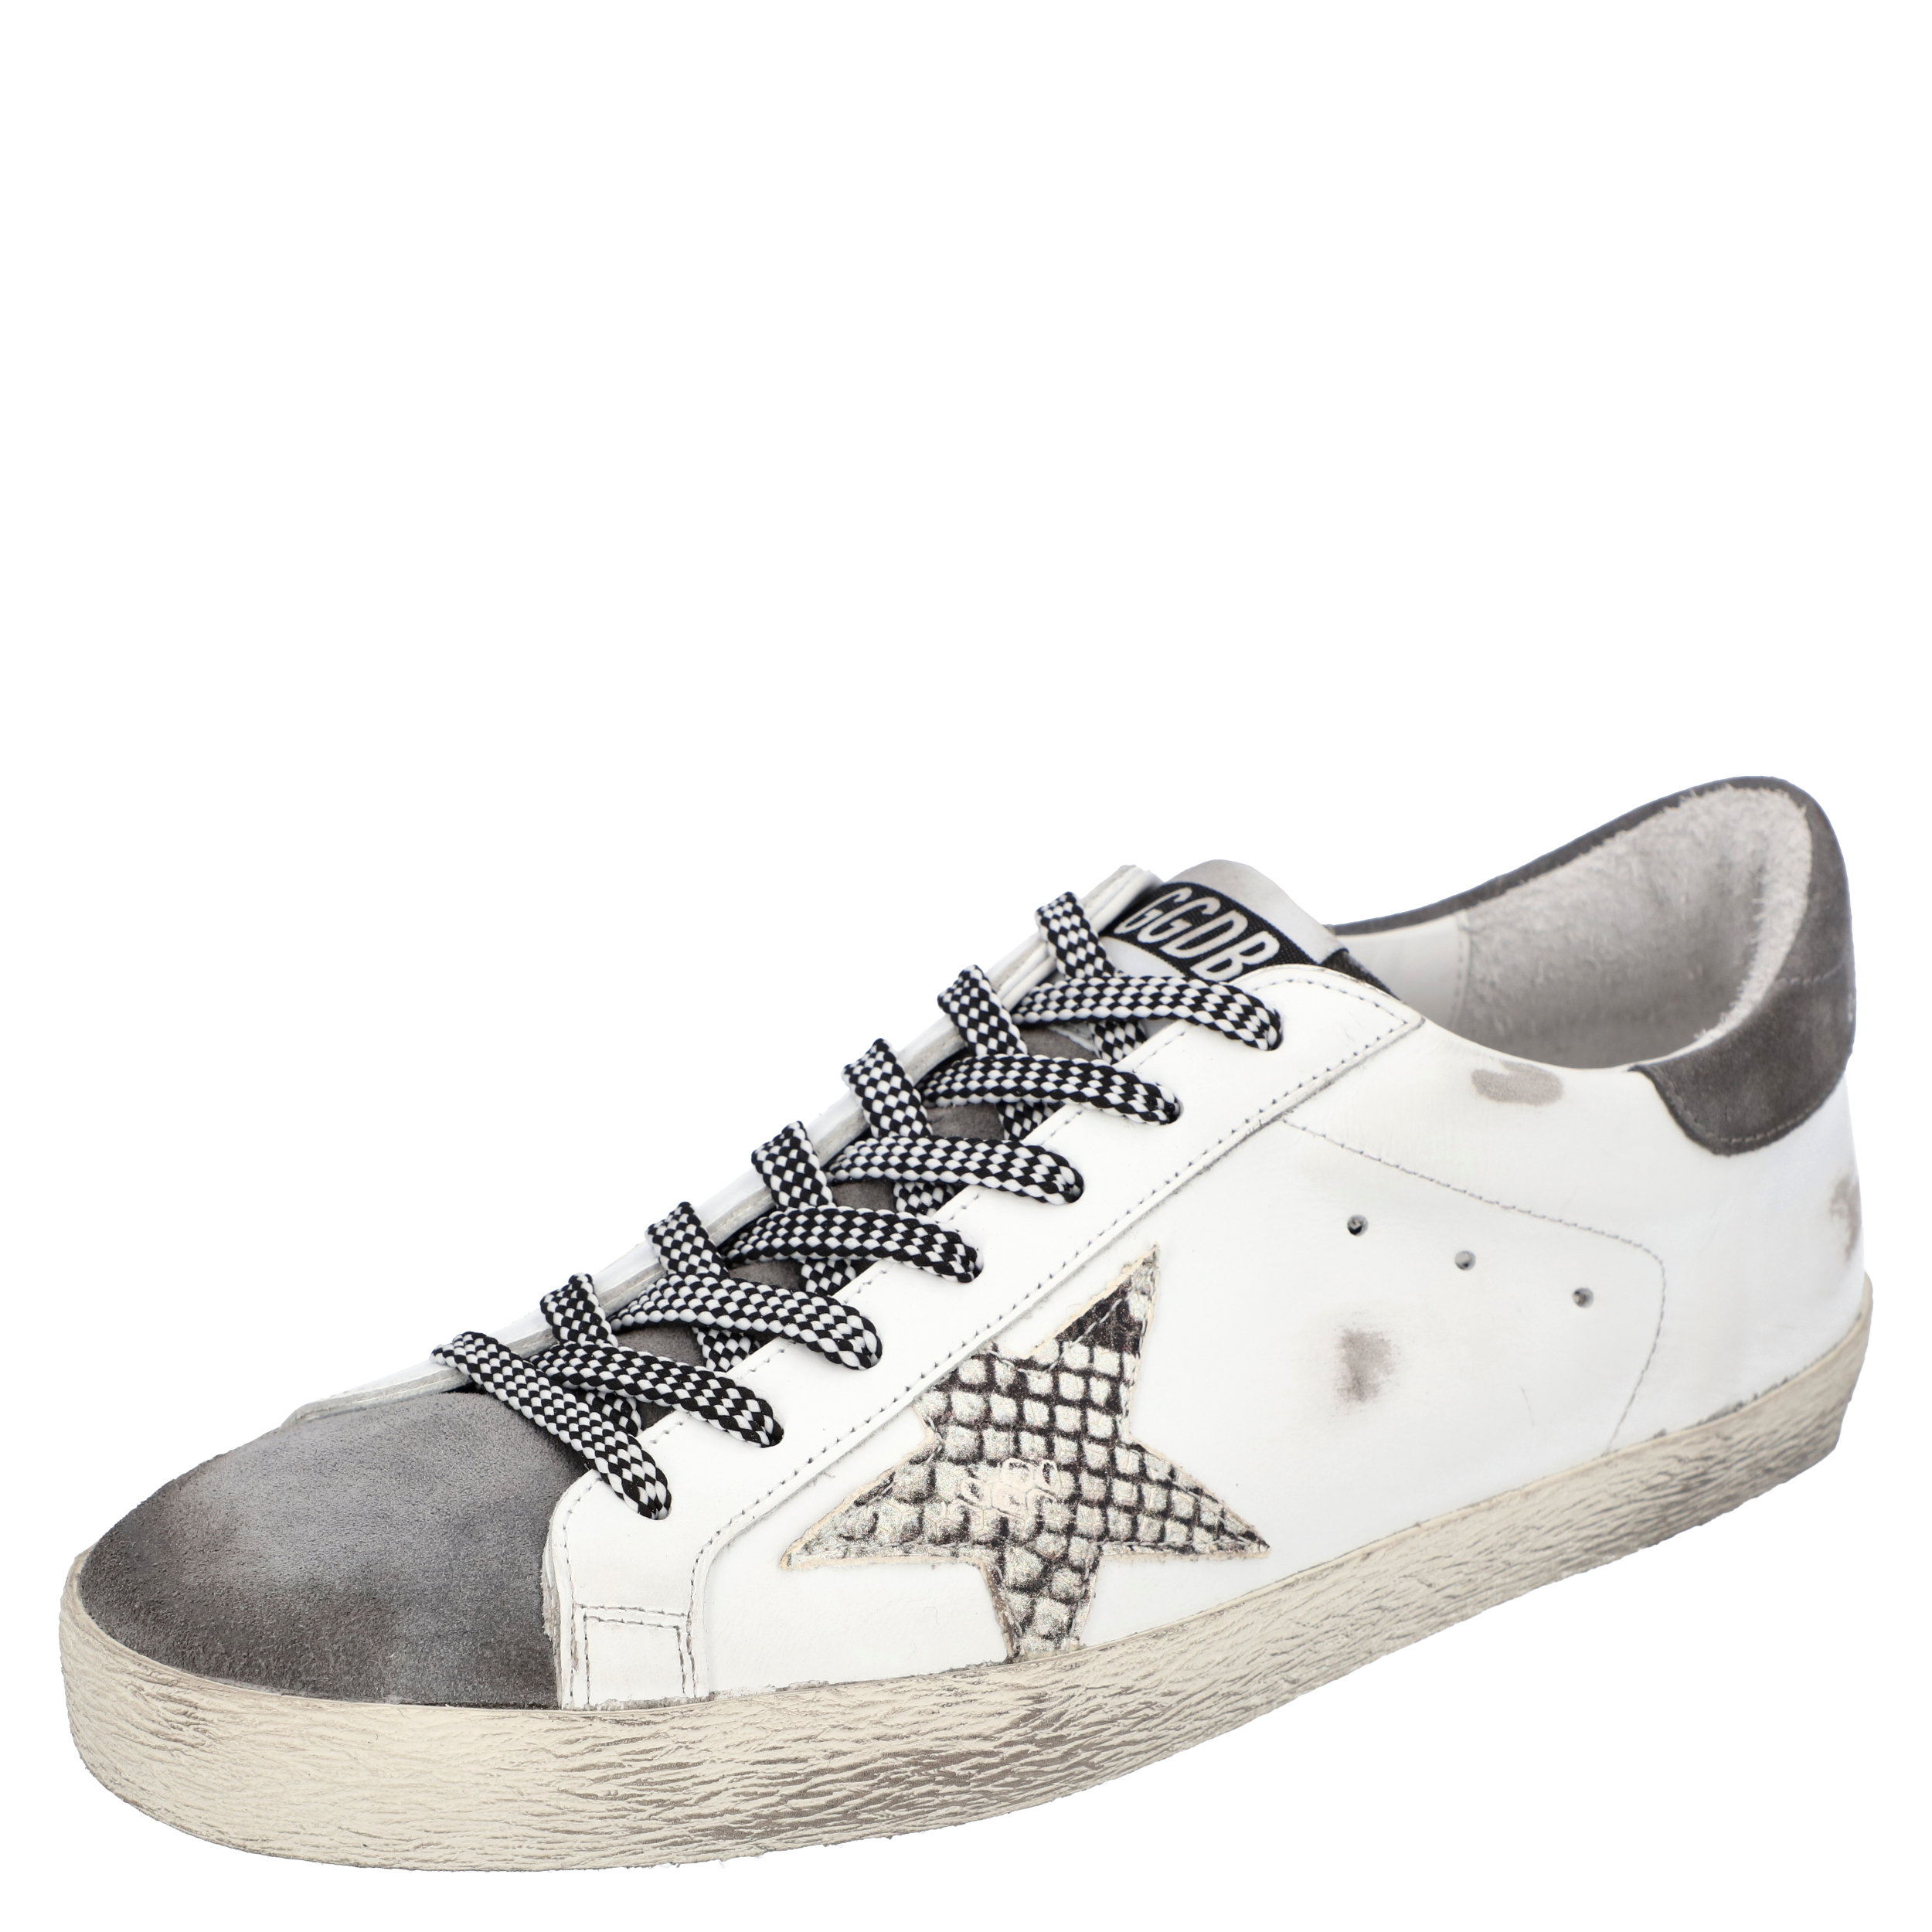 Golden Goose White/Grey Leather Superstar Sneakers Size EU 43